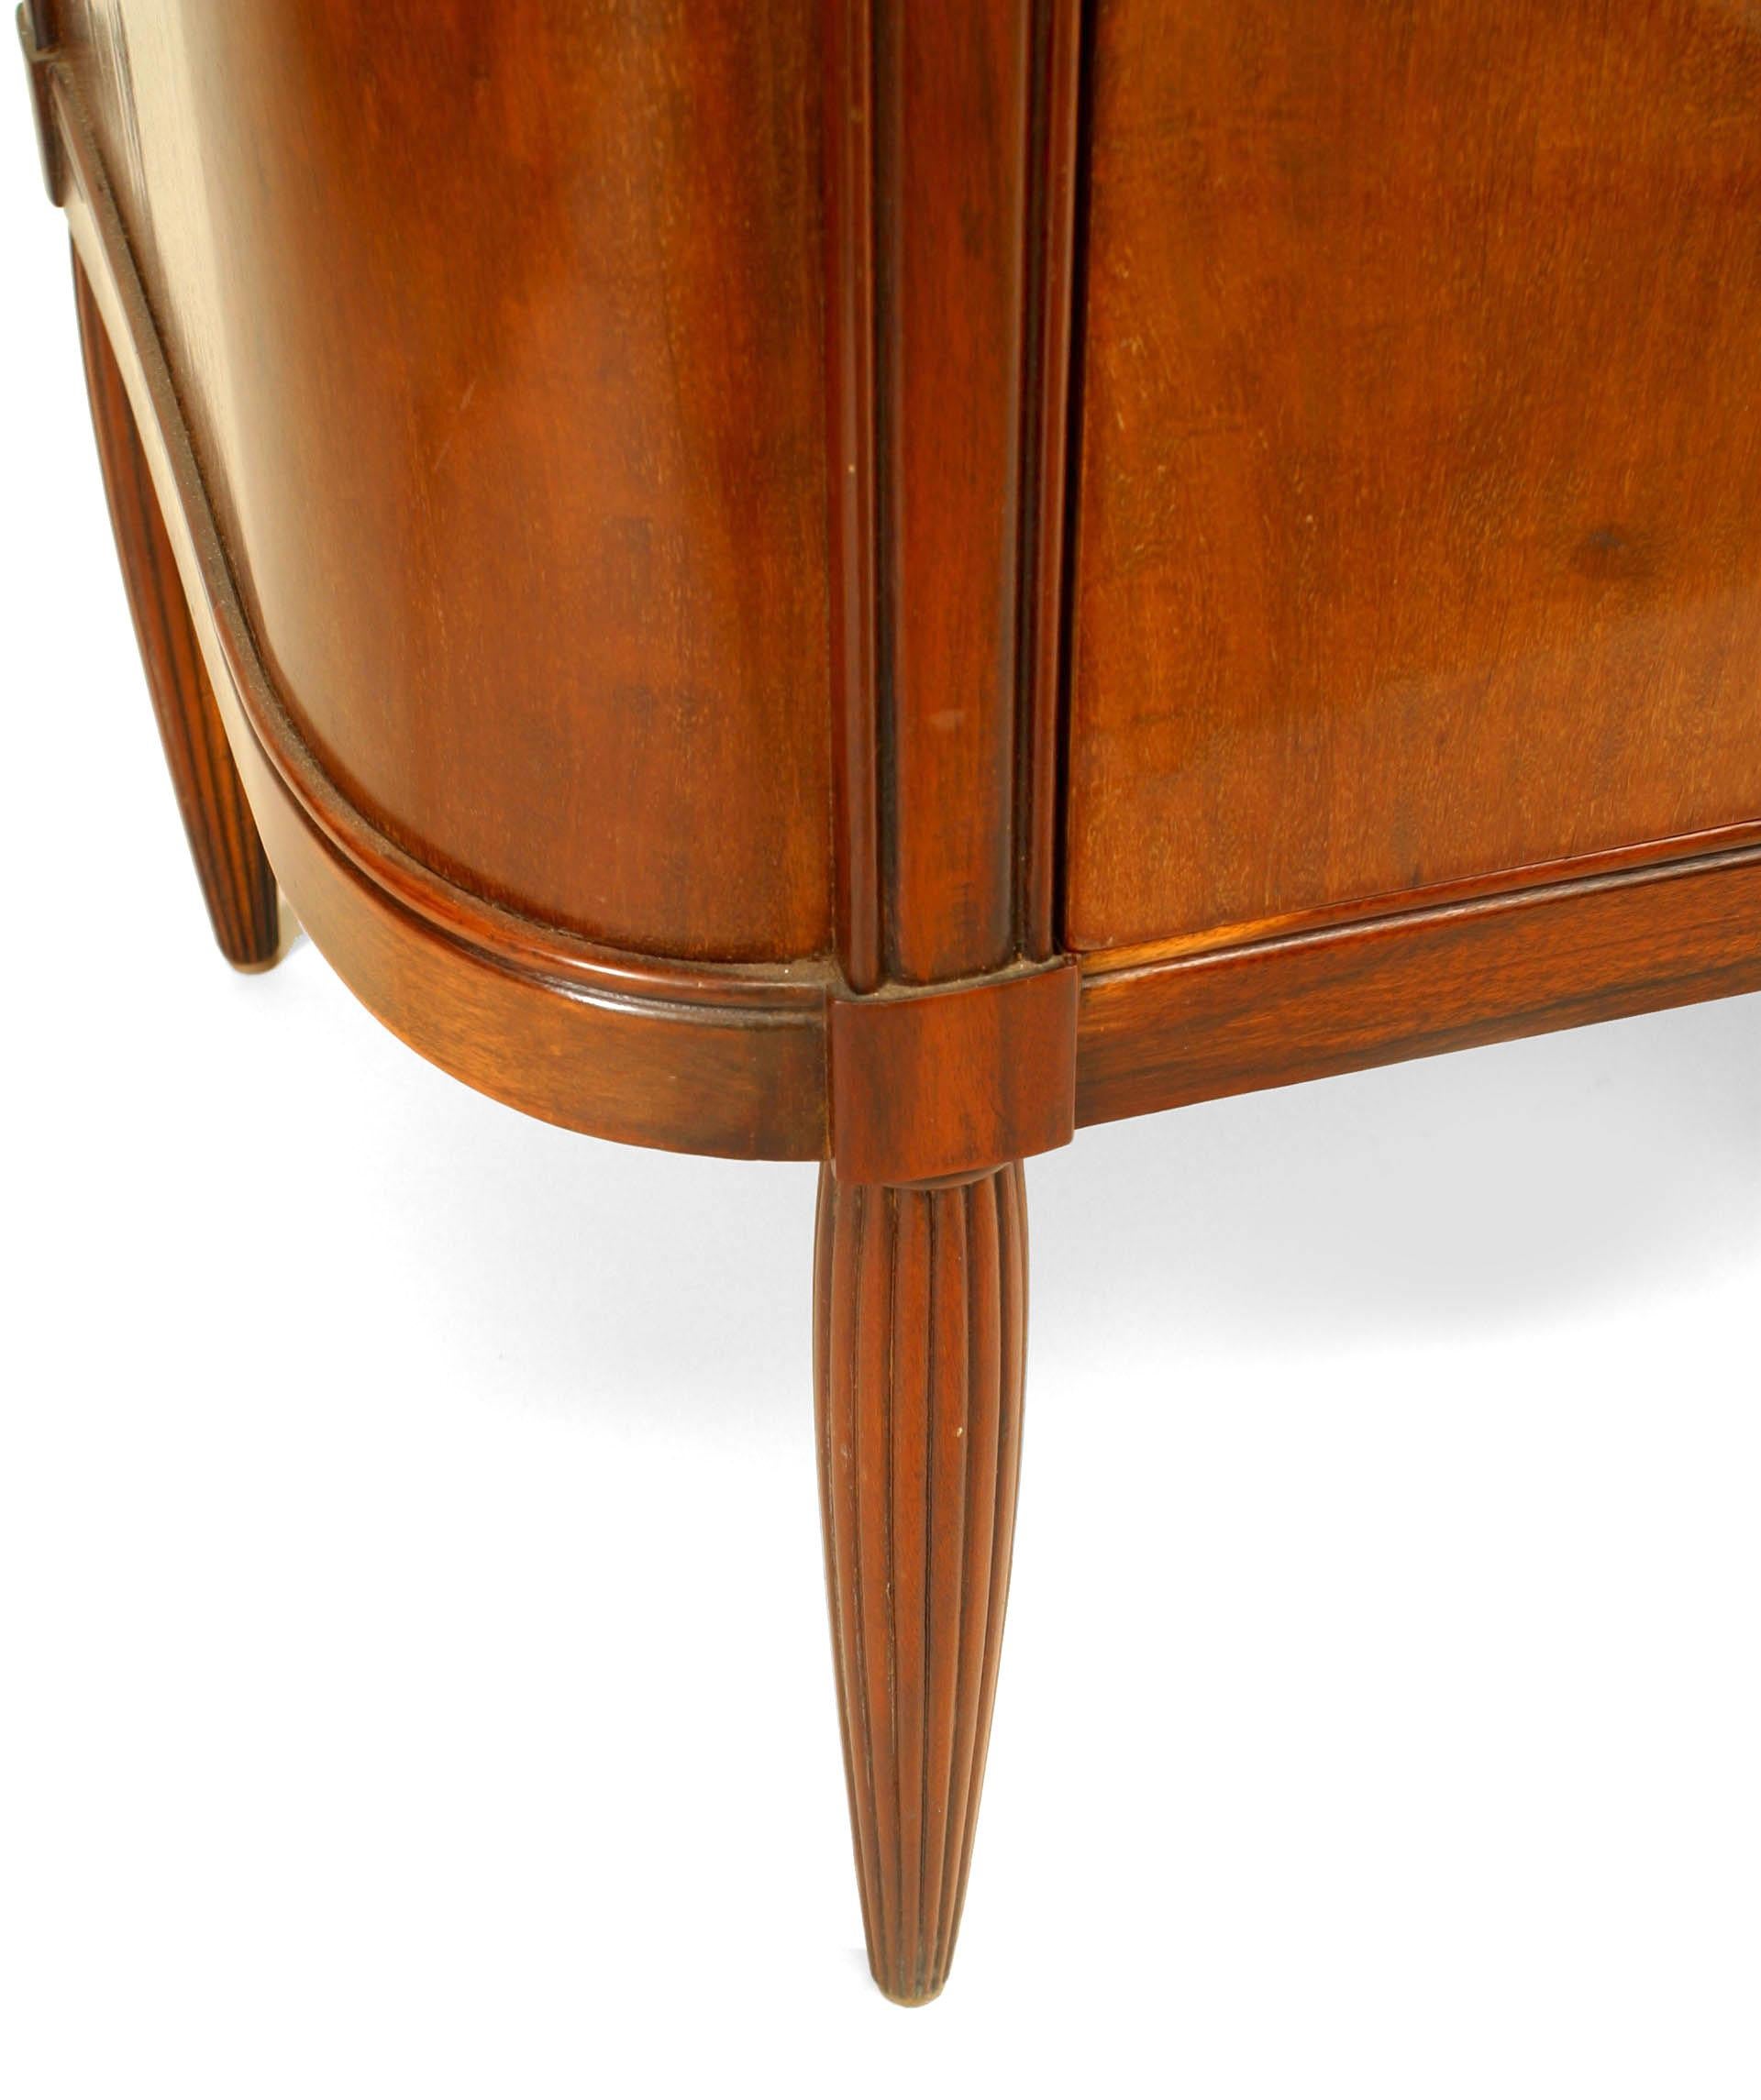 French Art Deco Dufrene Mahogany & Marble Commode For Sale 5